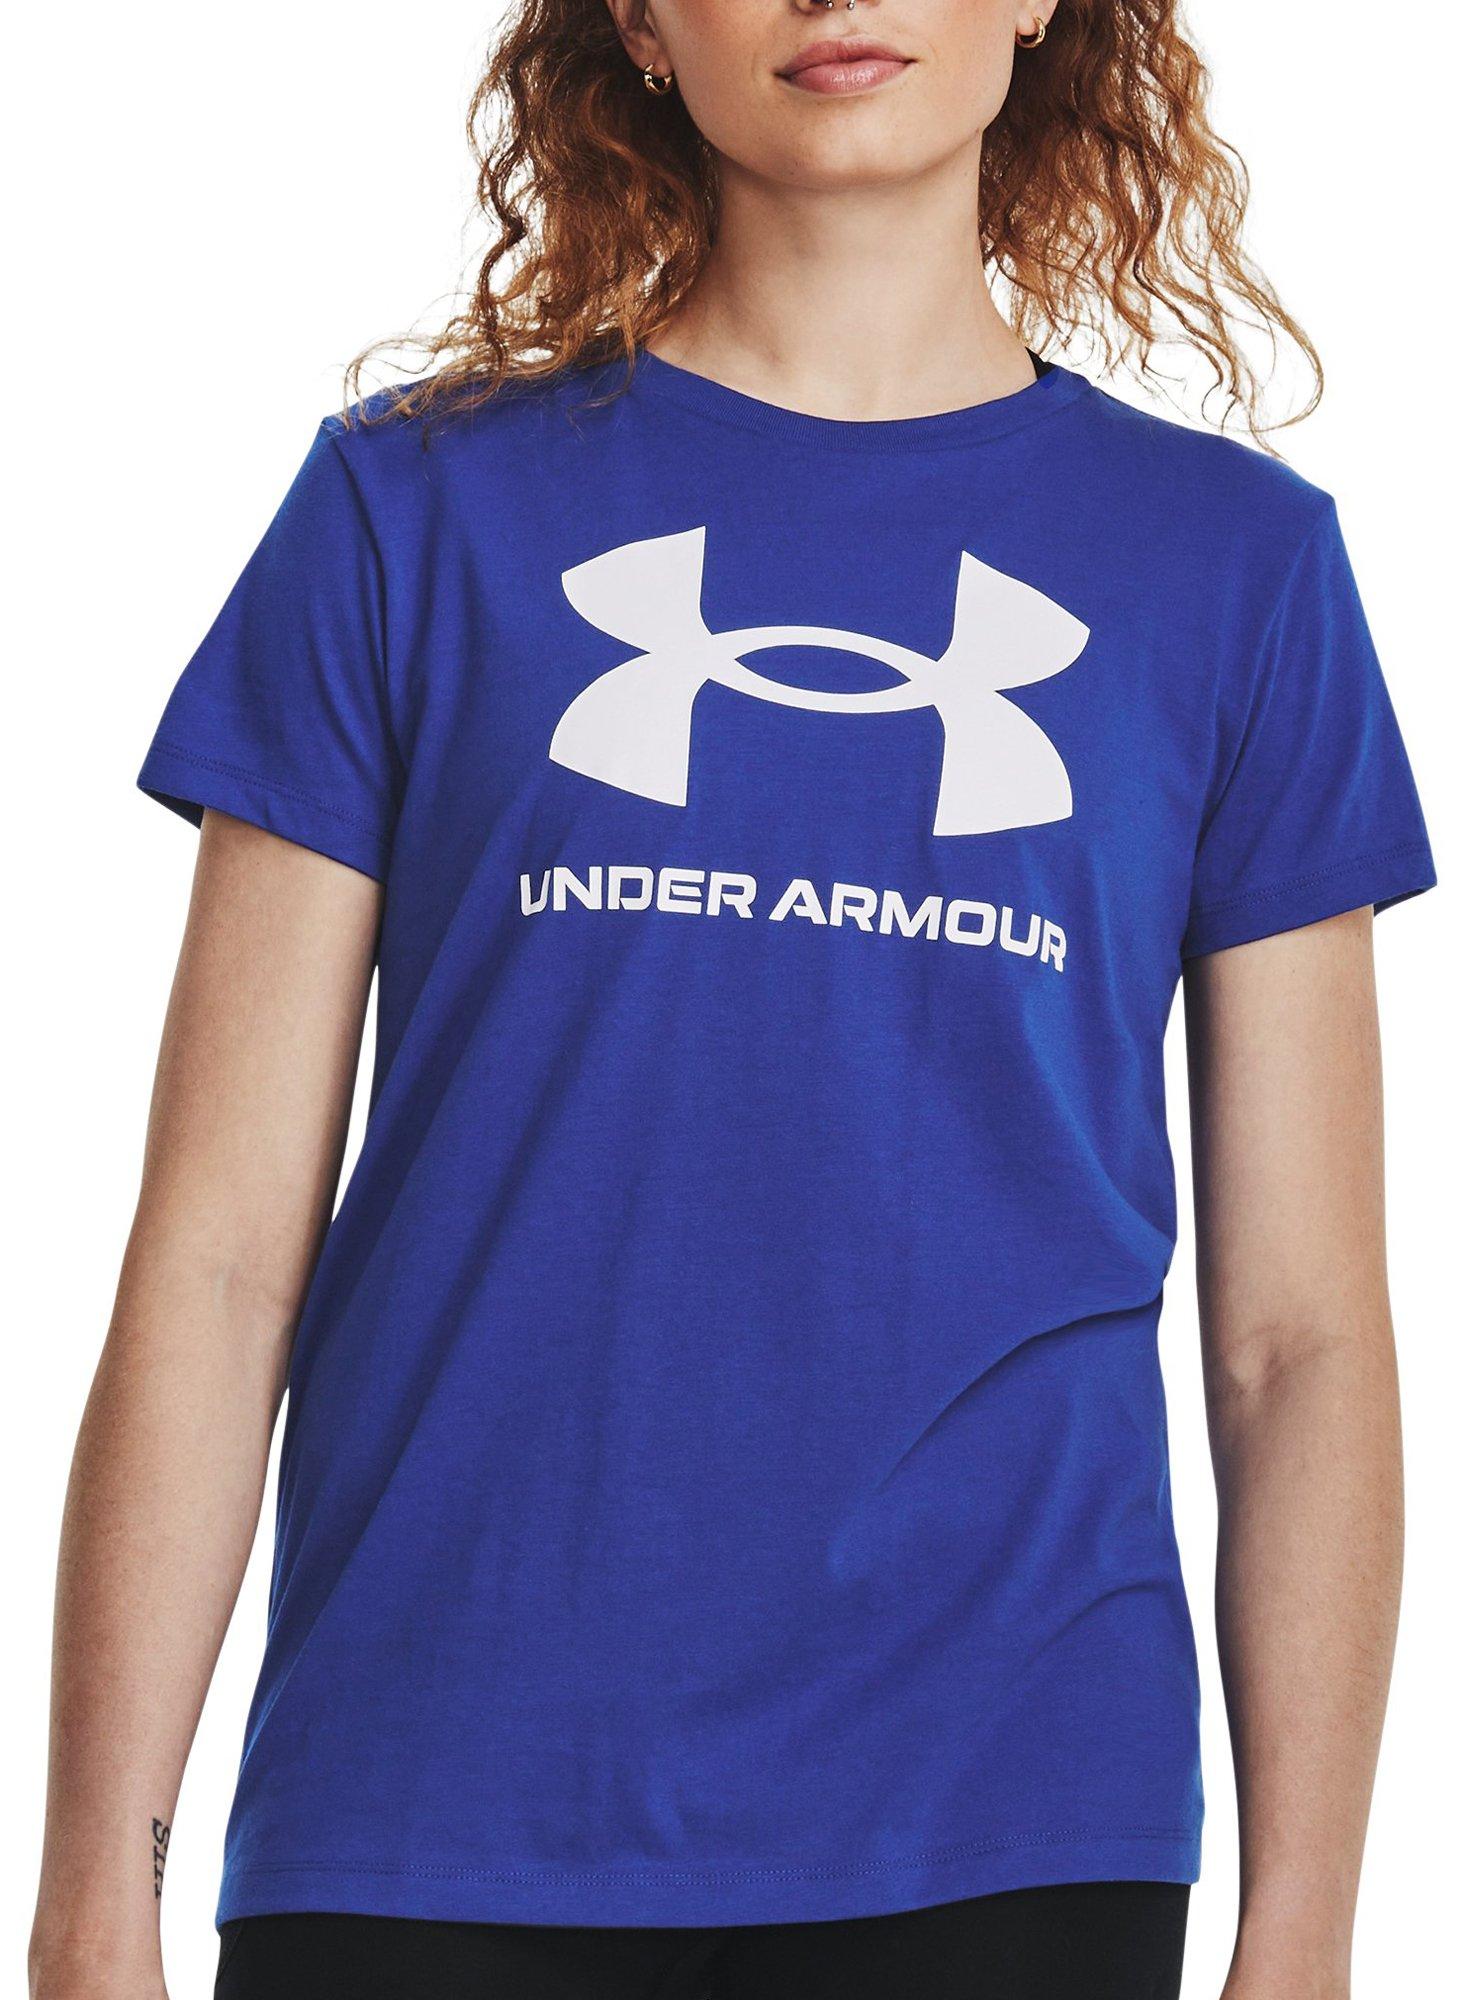 Womens UA Sportstyle Graphic Short Sleeve Top